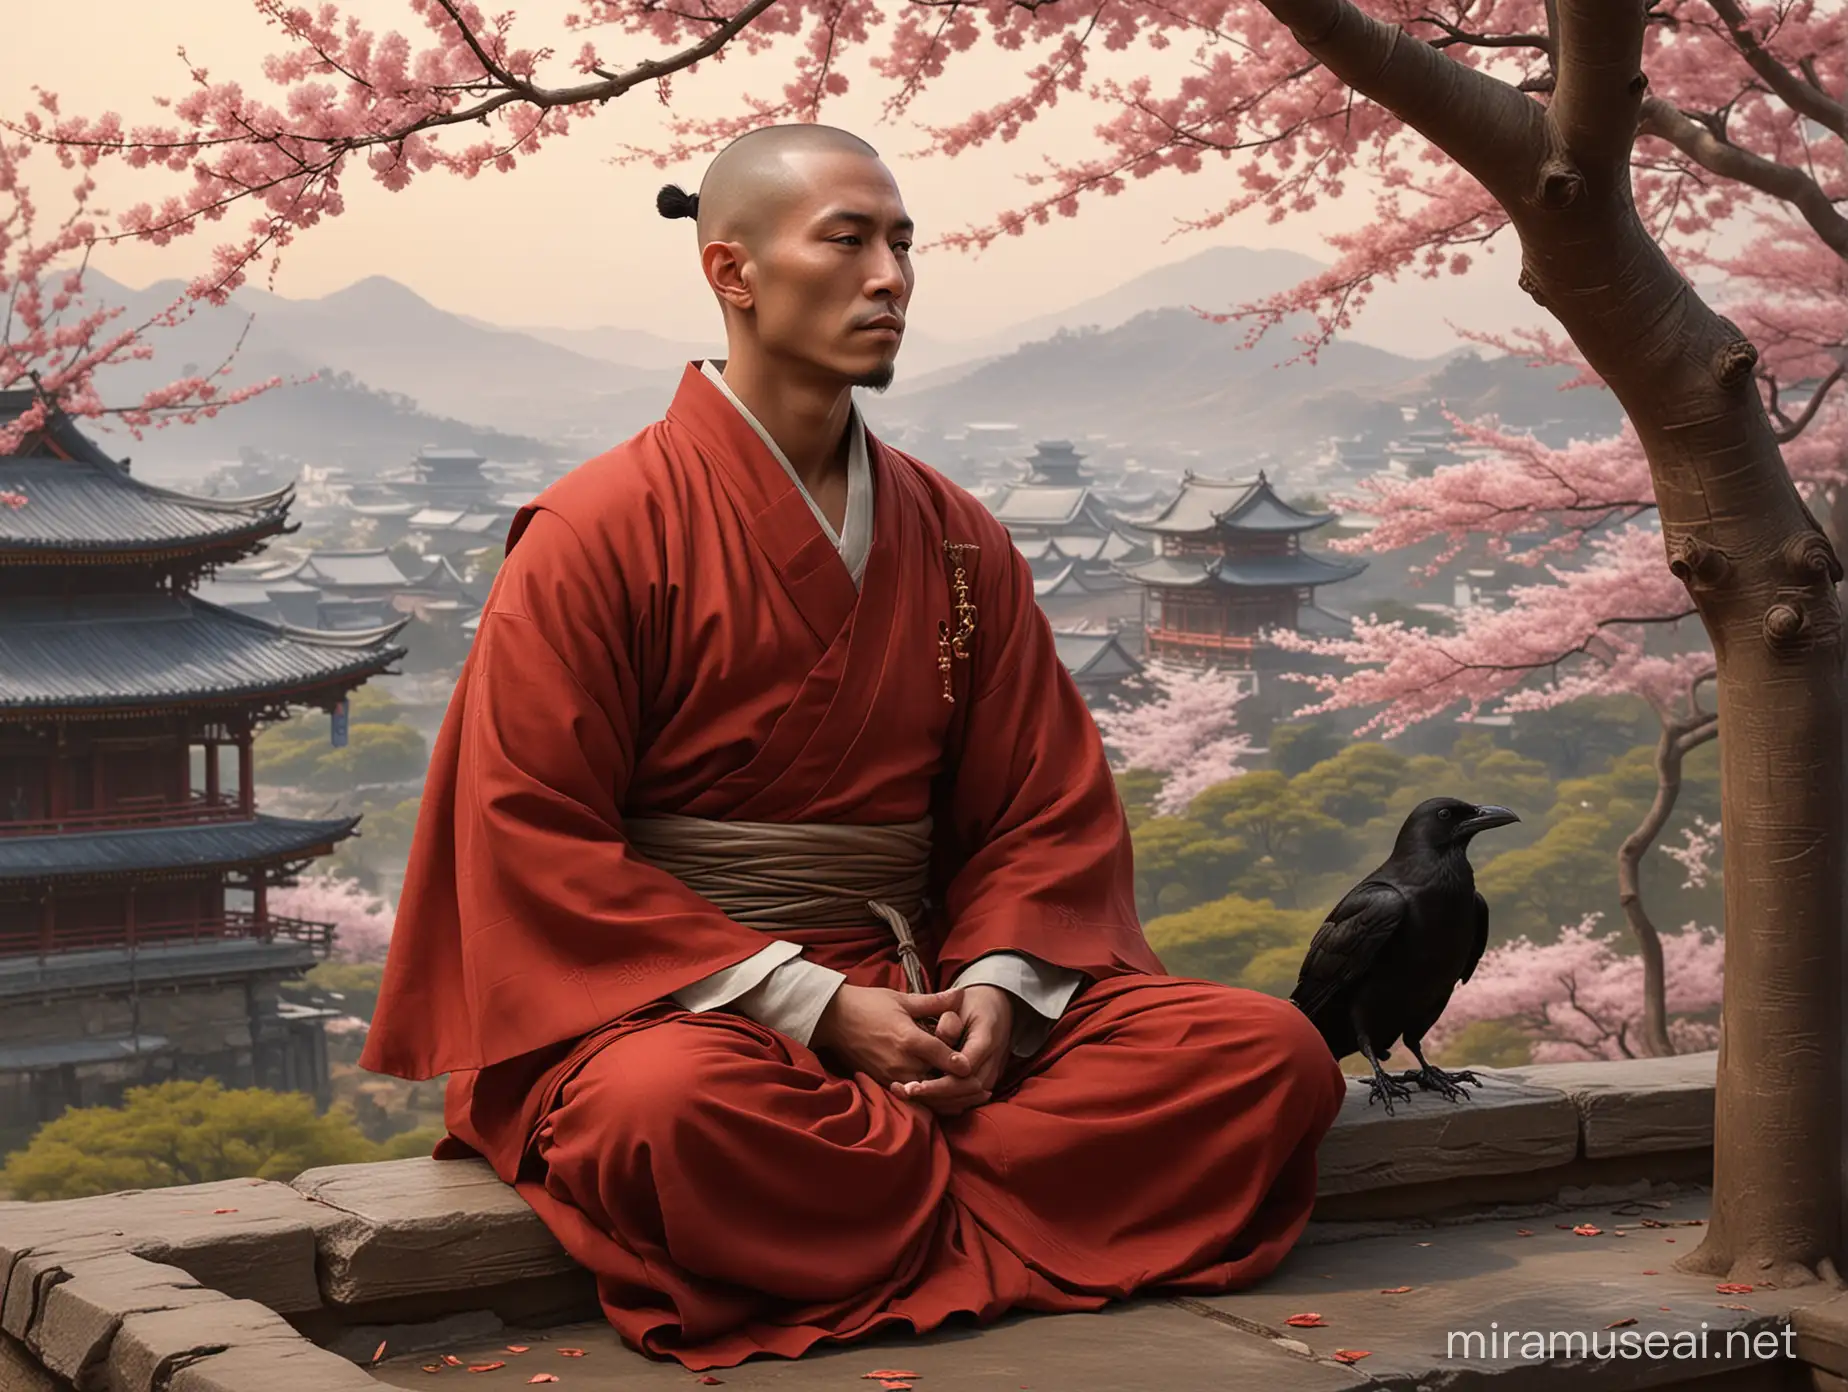 Serene Scorpion Clan Monk Meditating with Raven Companion at Japanese Temple